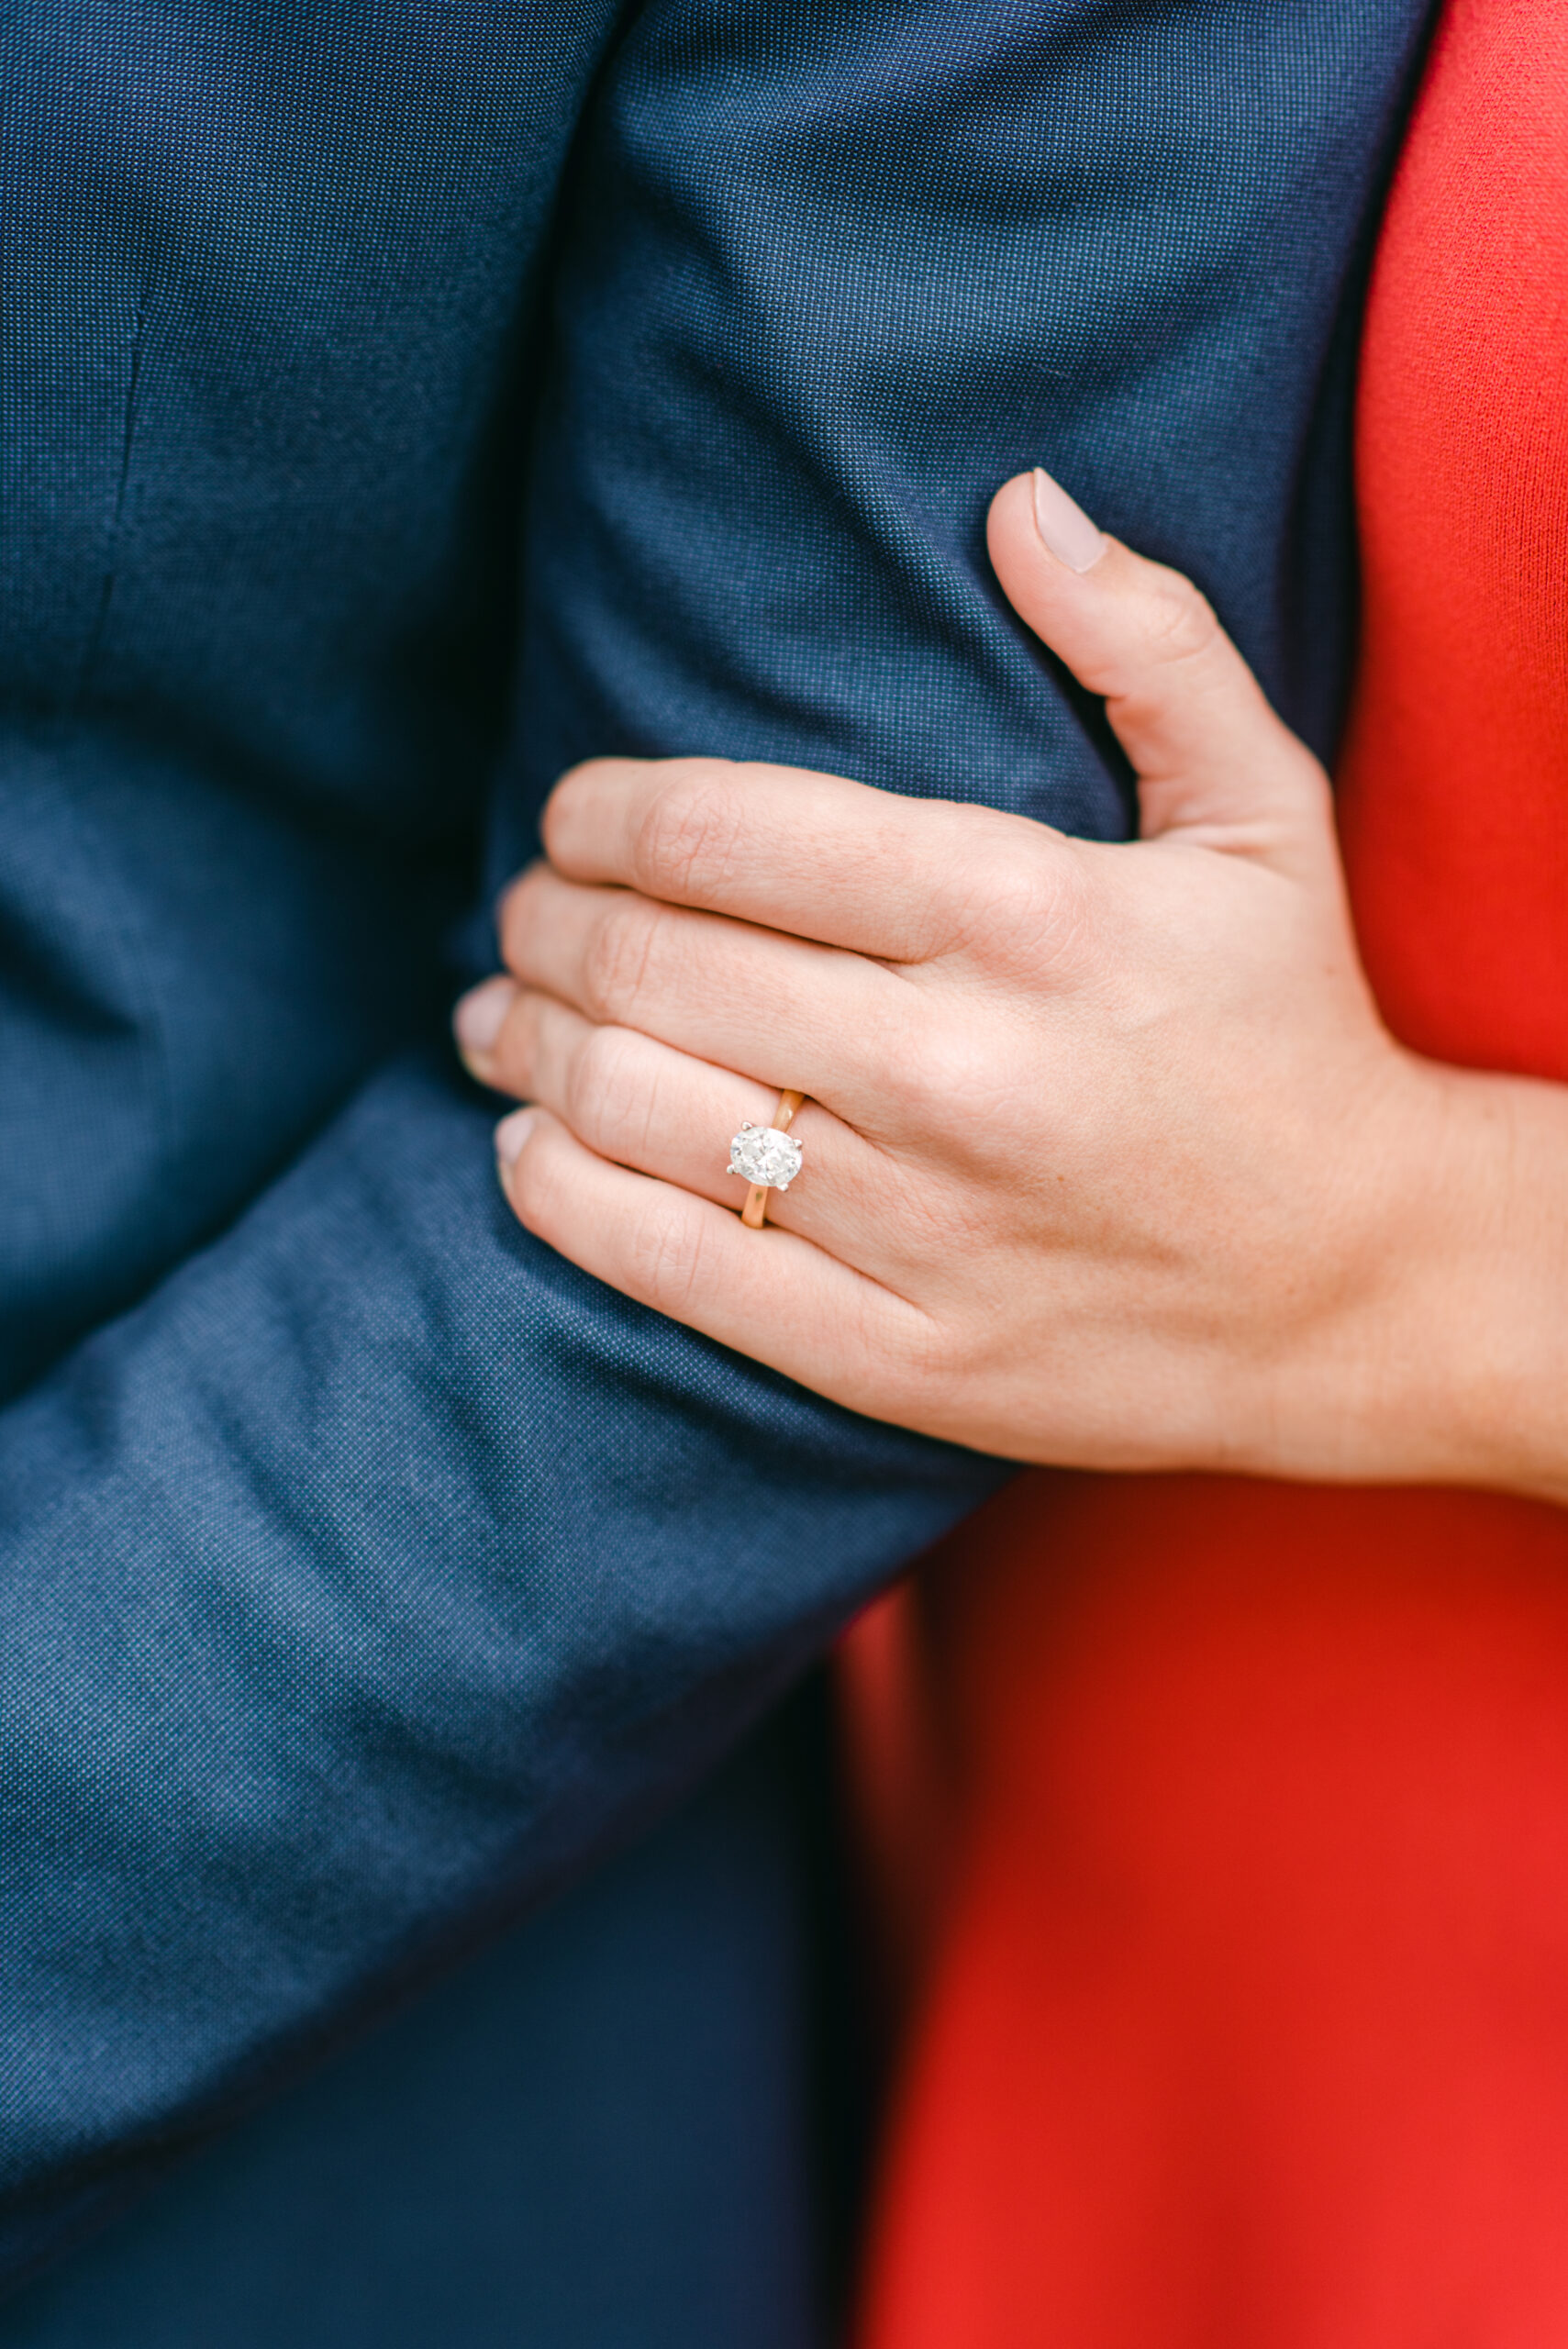 Everything You Need to Know to Keep Your Proposal a Surprise